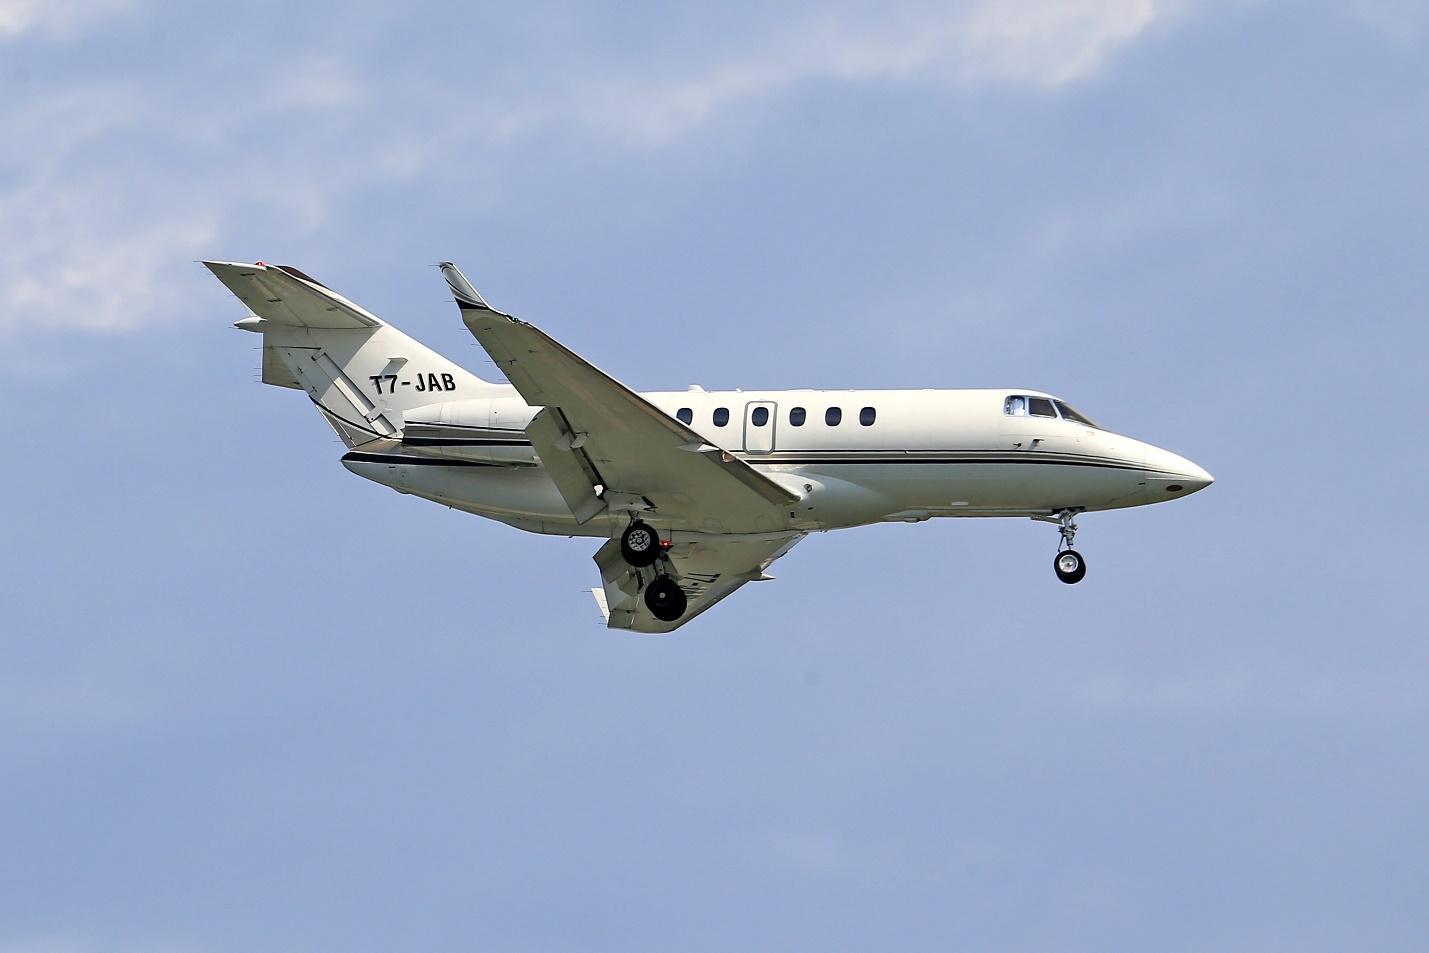 A flying private jet